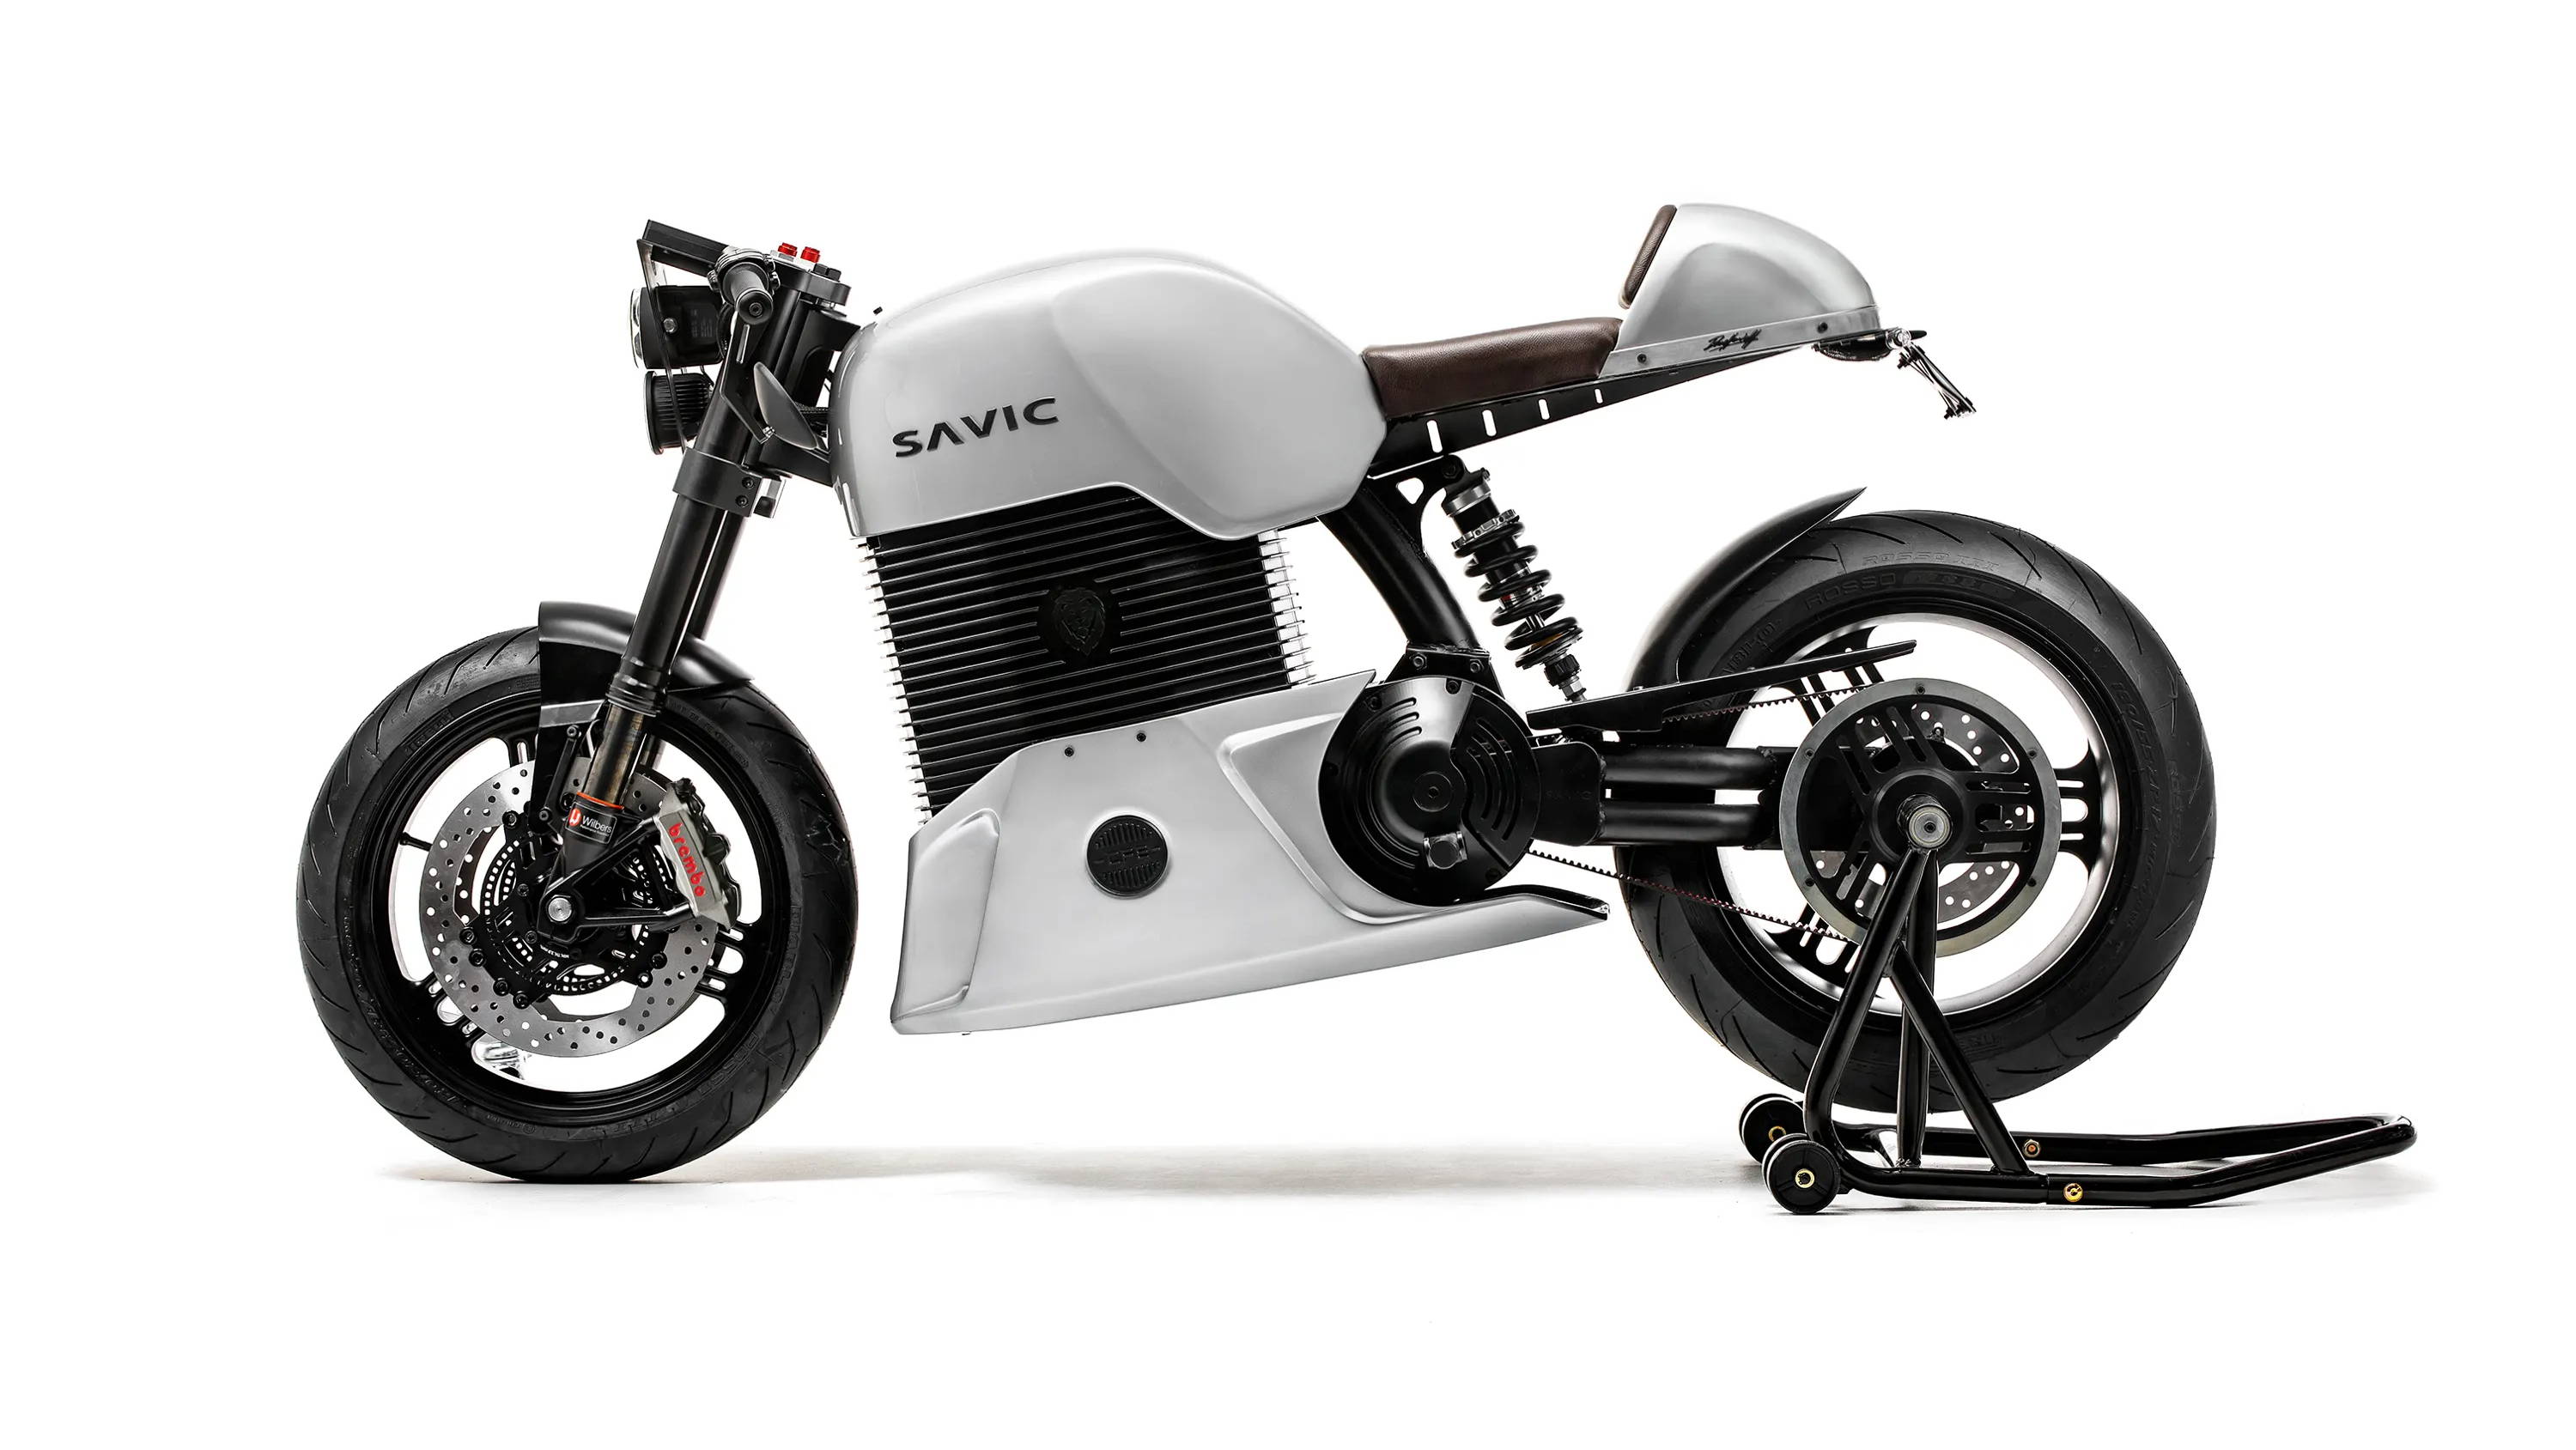 Savic Electric Cafe racer motorcycles - Lighter